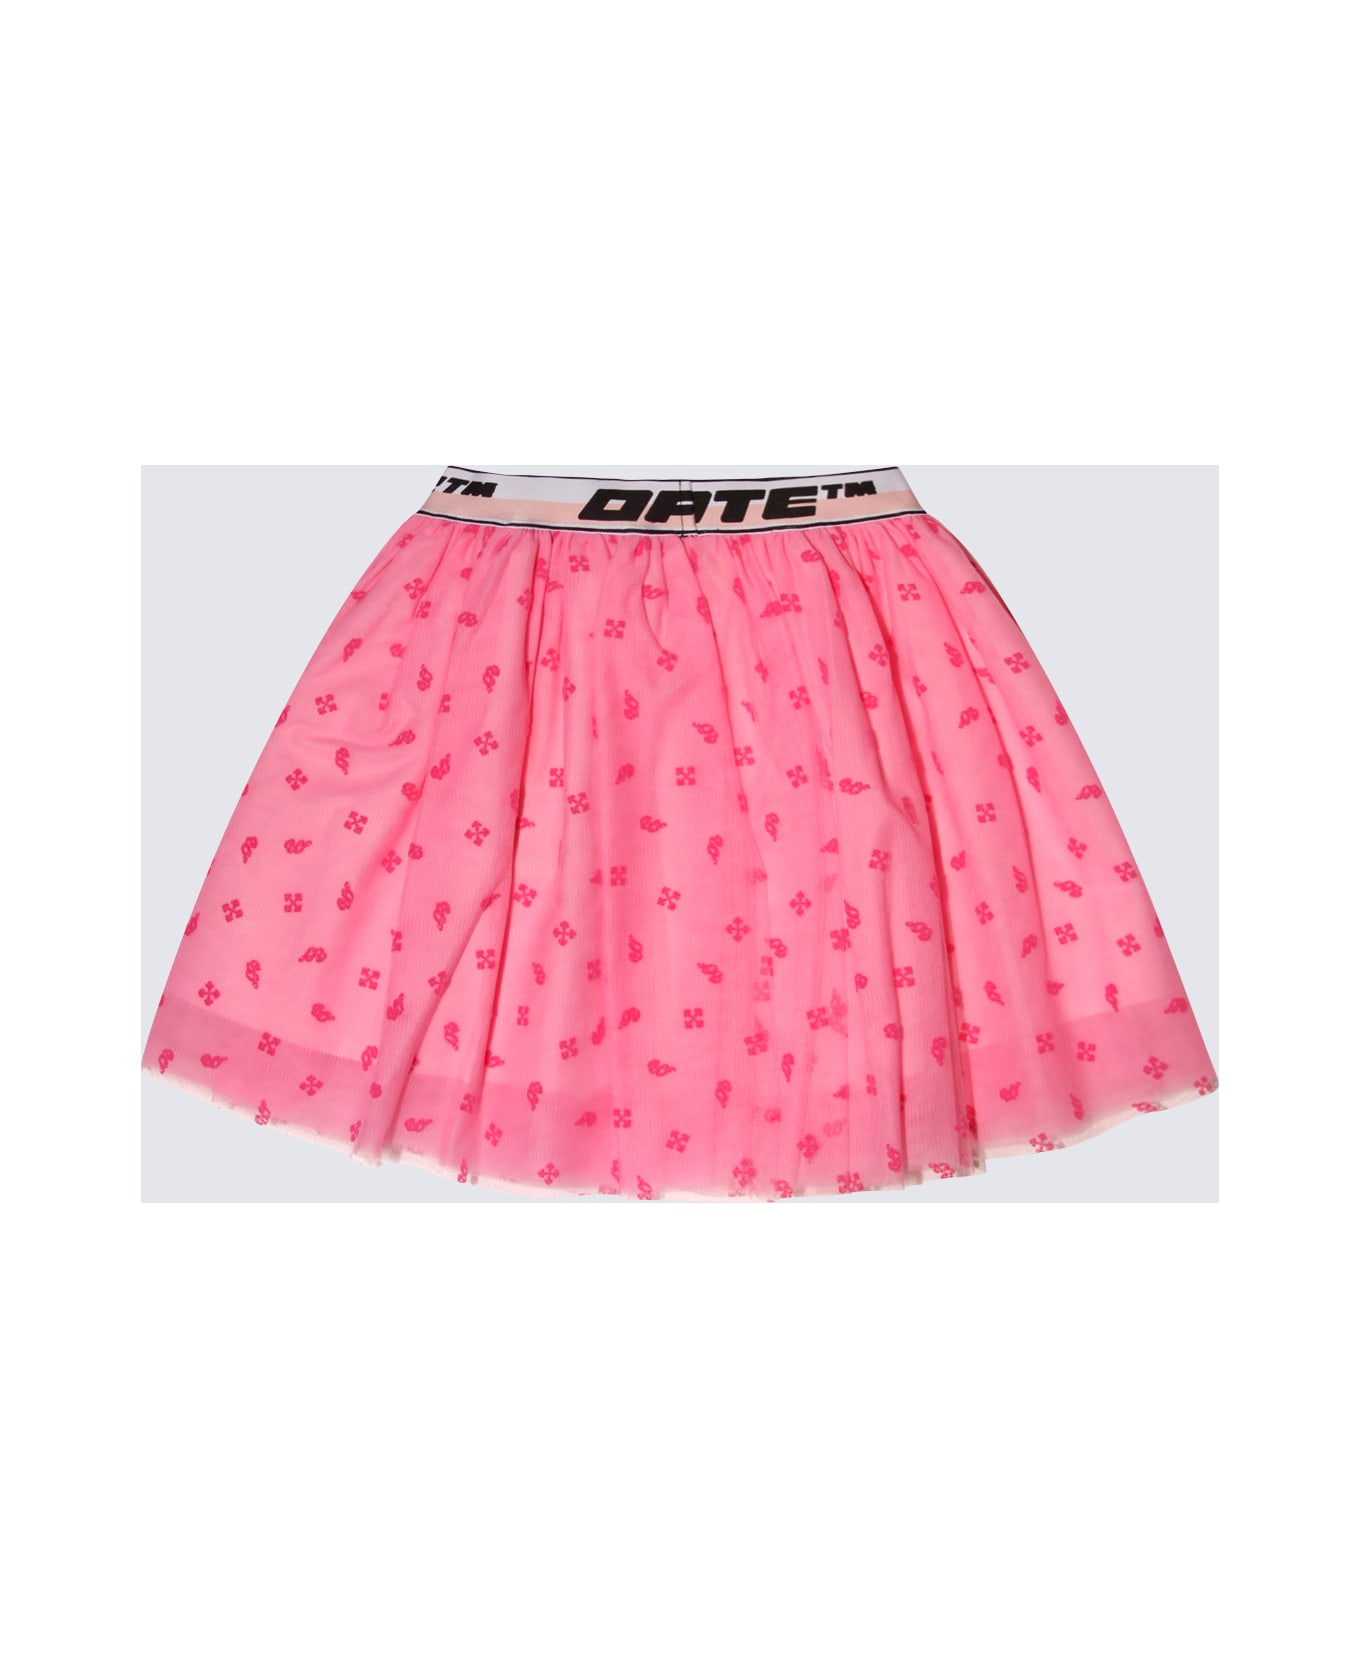 Off-White Pink And Black Tulle Skirt - PINK/BLACK ボトムス